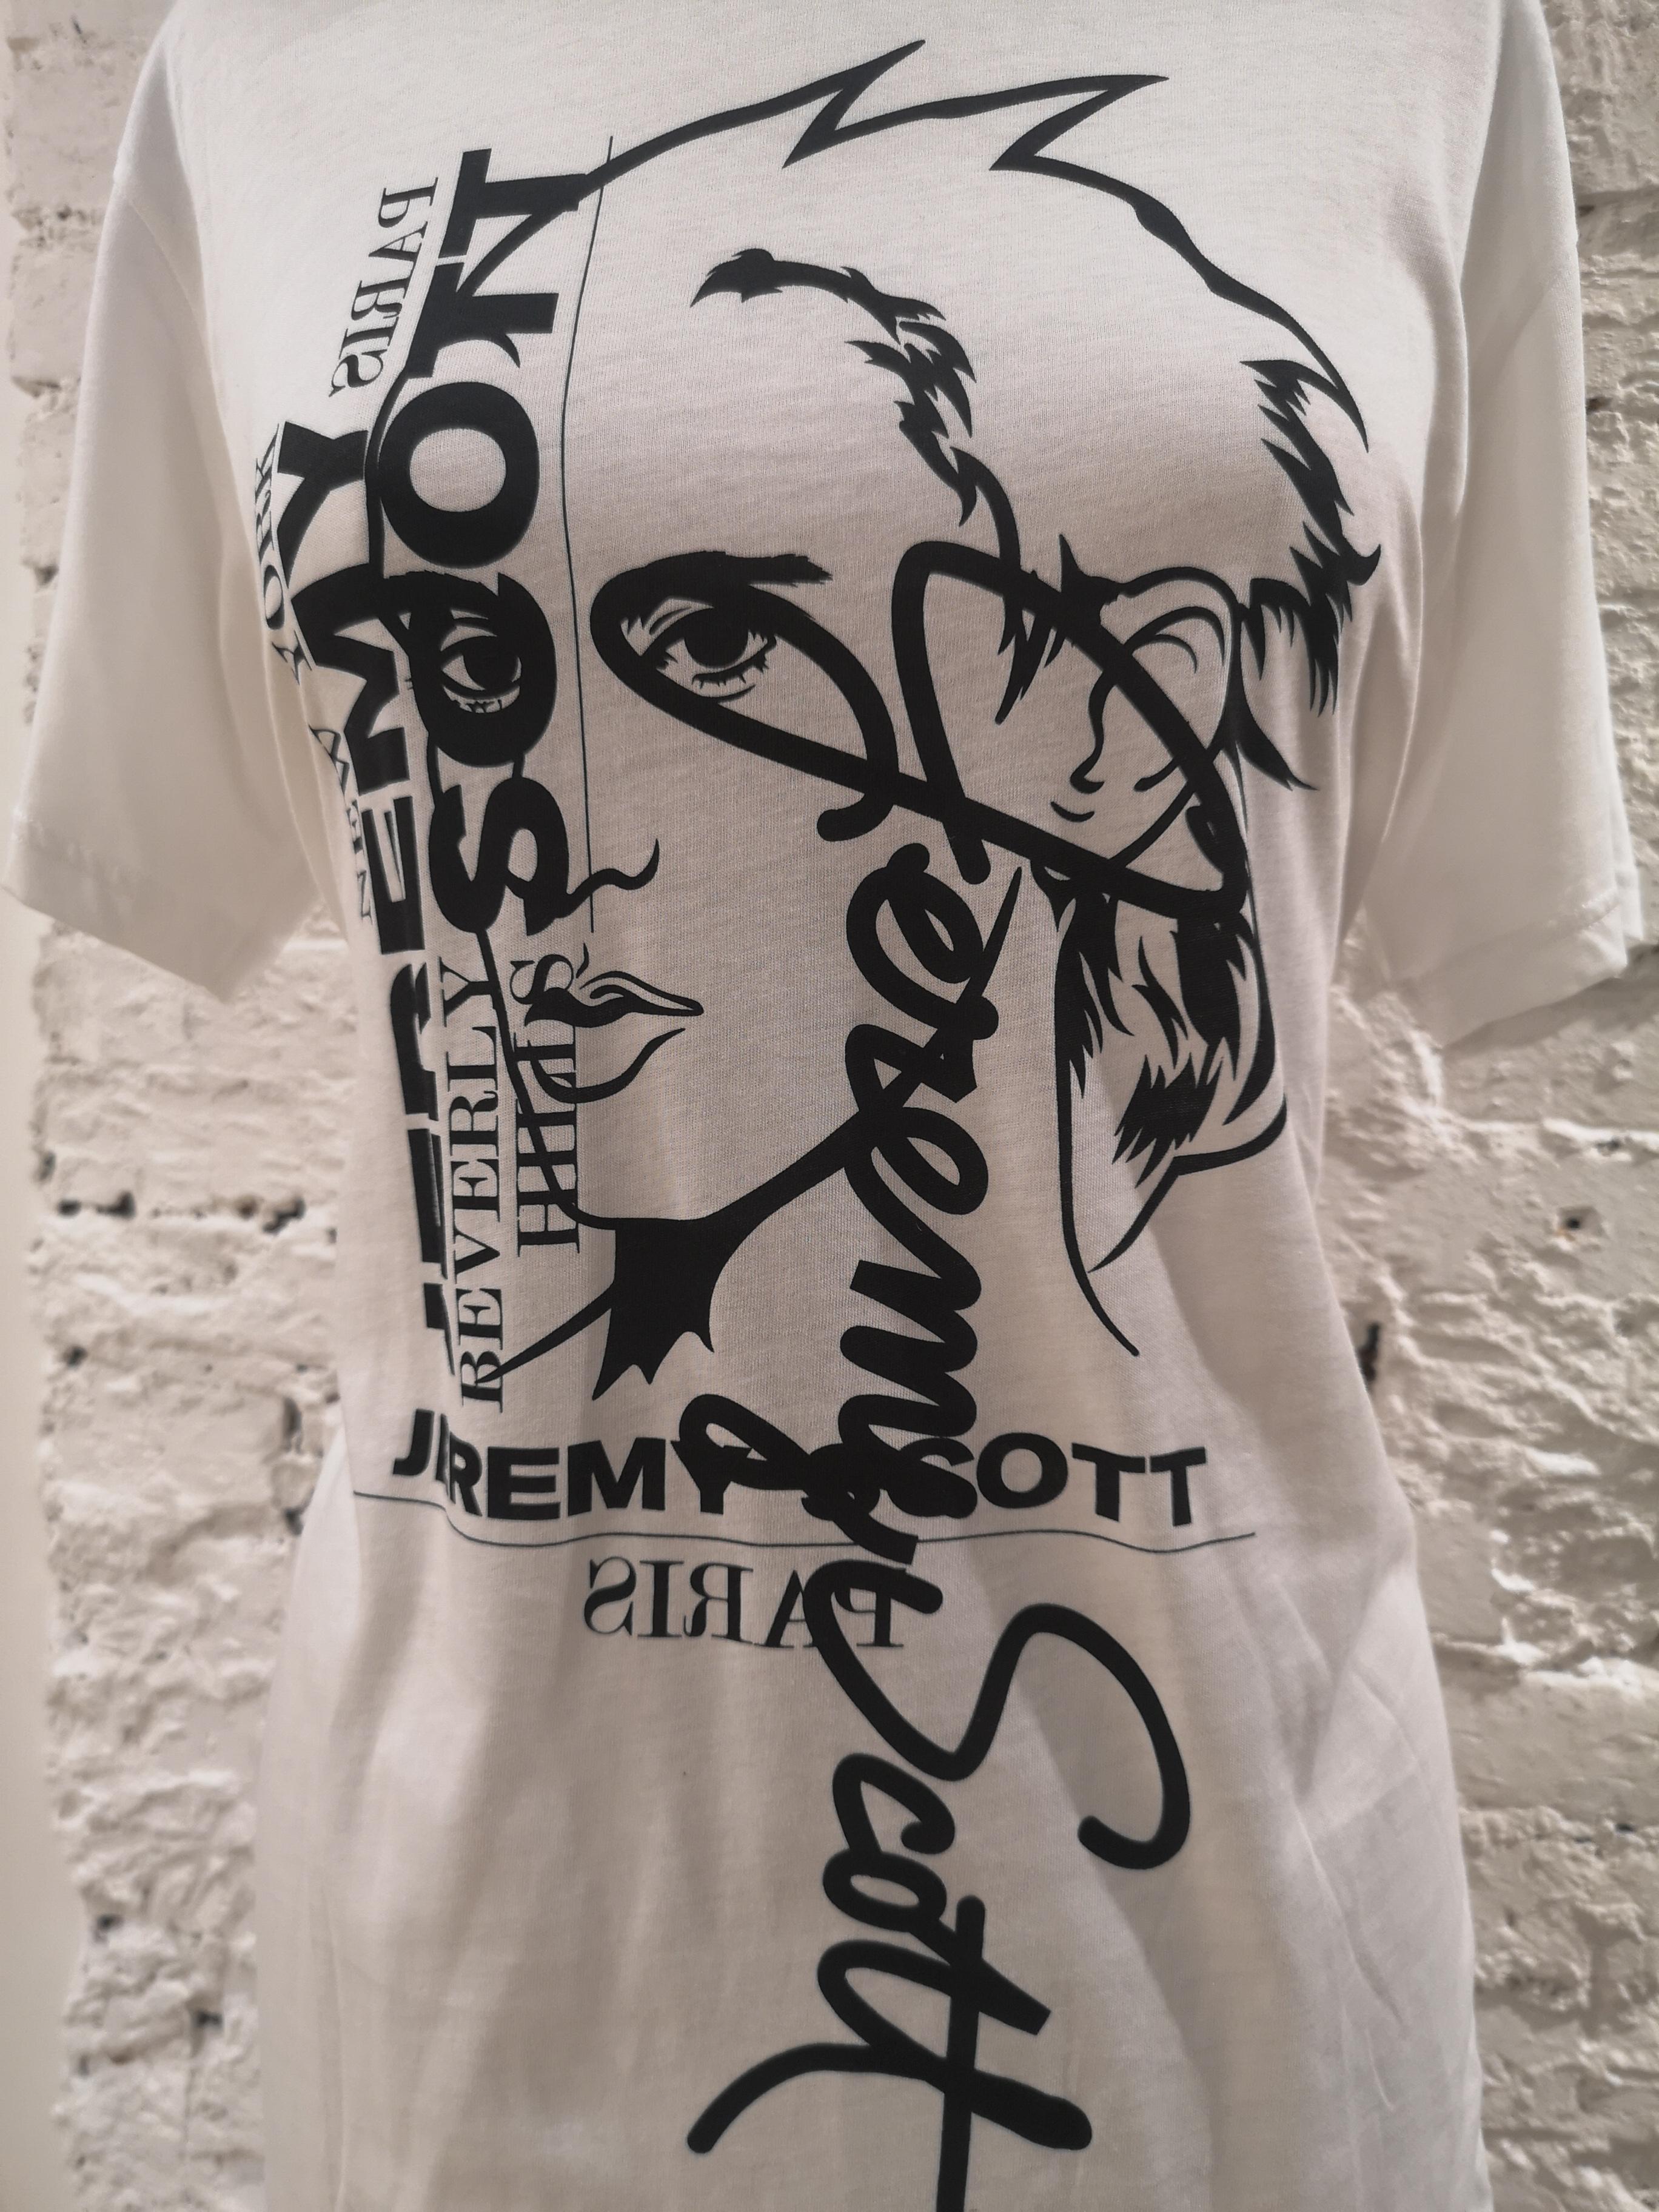 Jeremy Scott white cotton T-shirt NWOT
totally made in italy in 100% cotton
size s
total lenght 70 cm